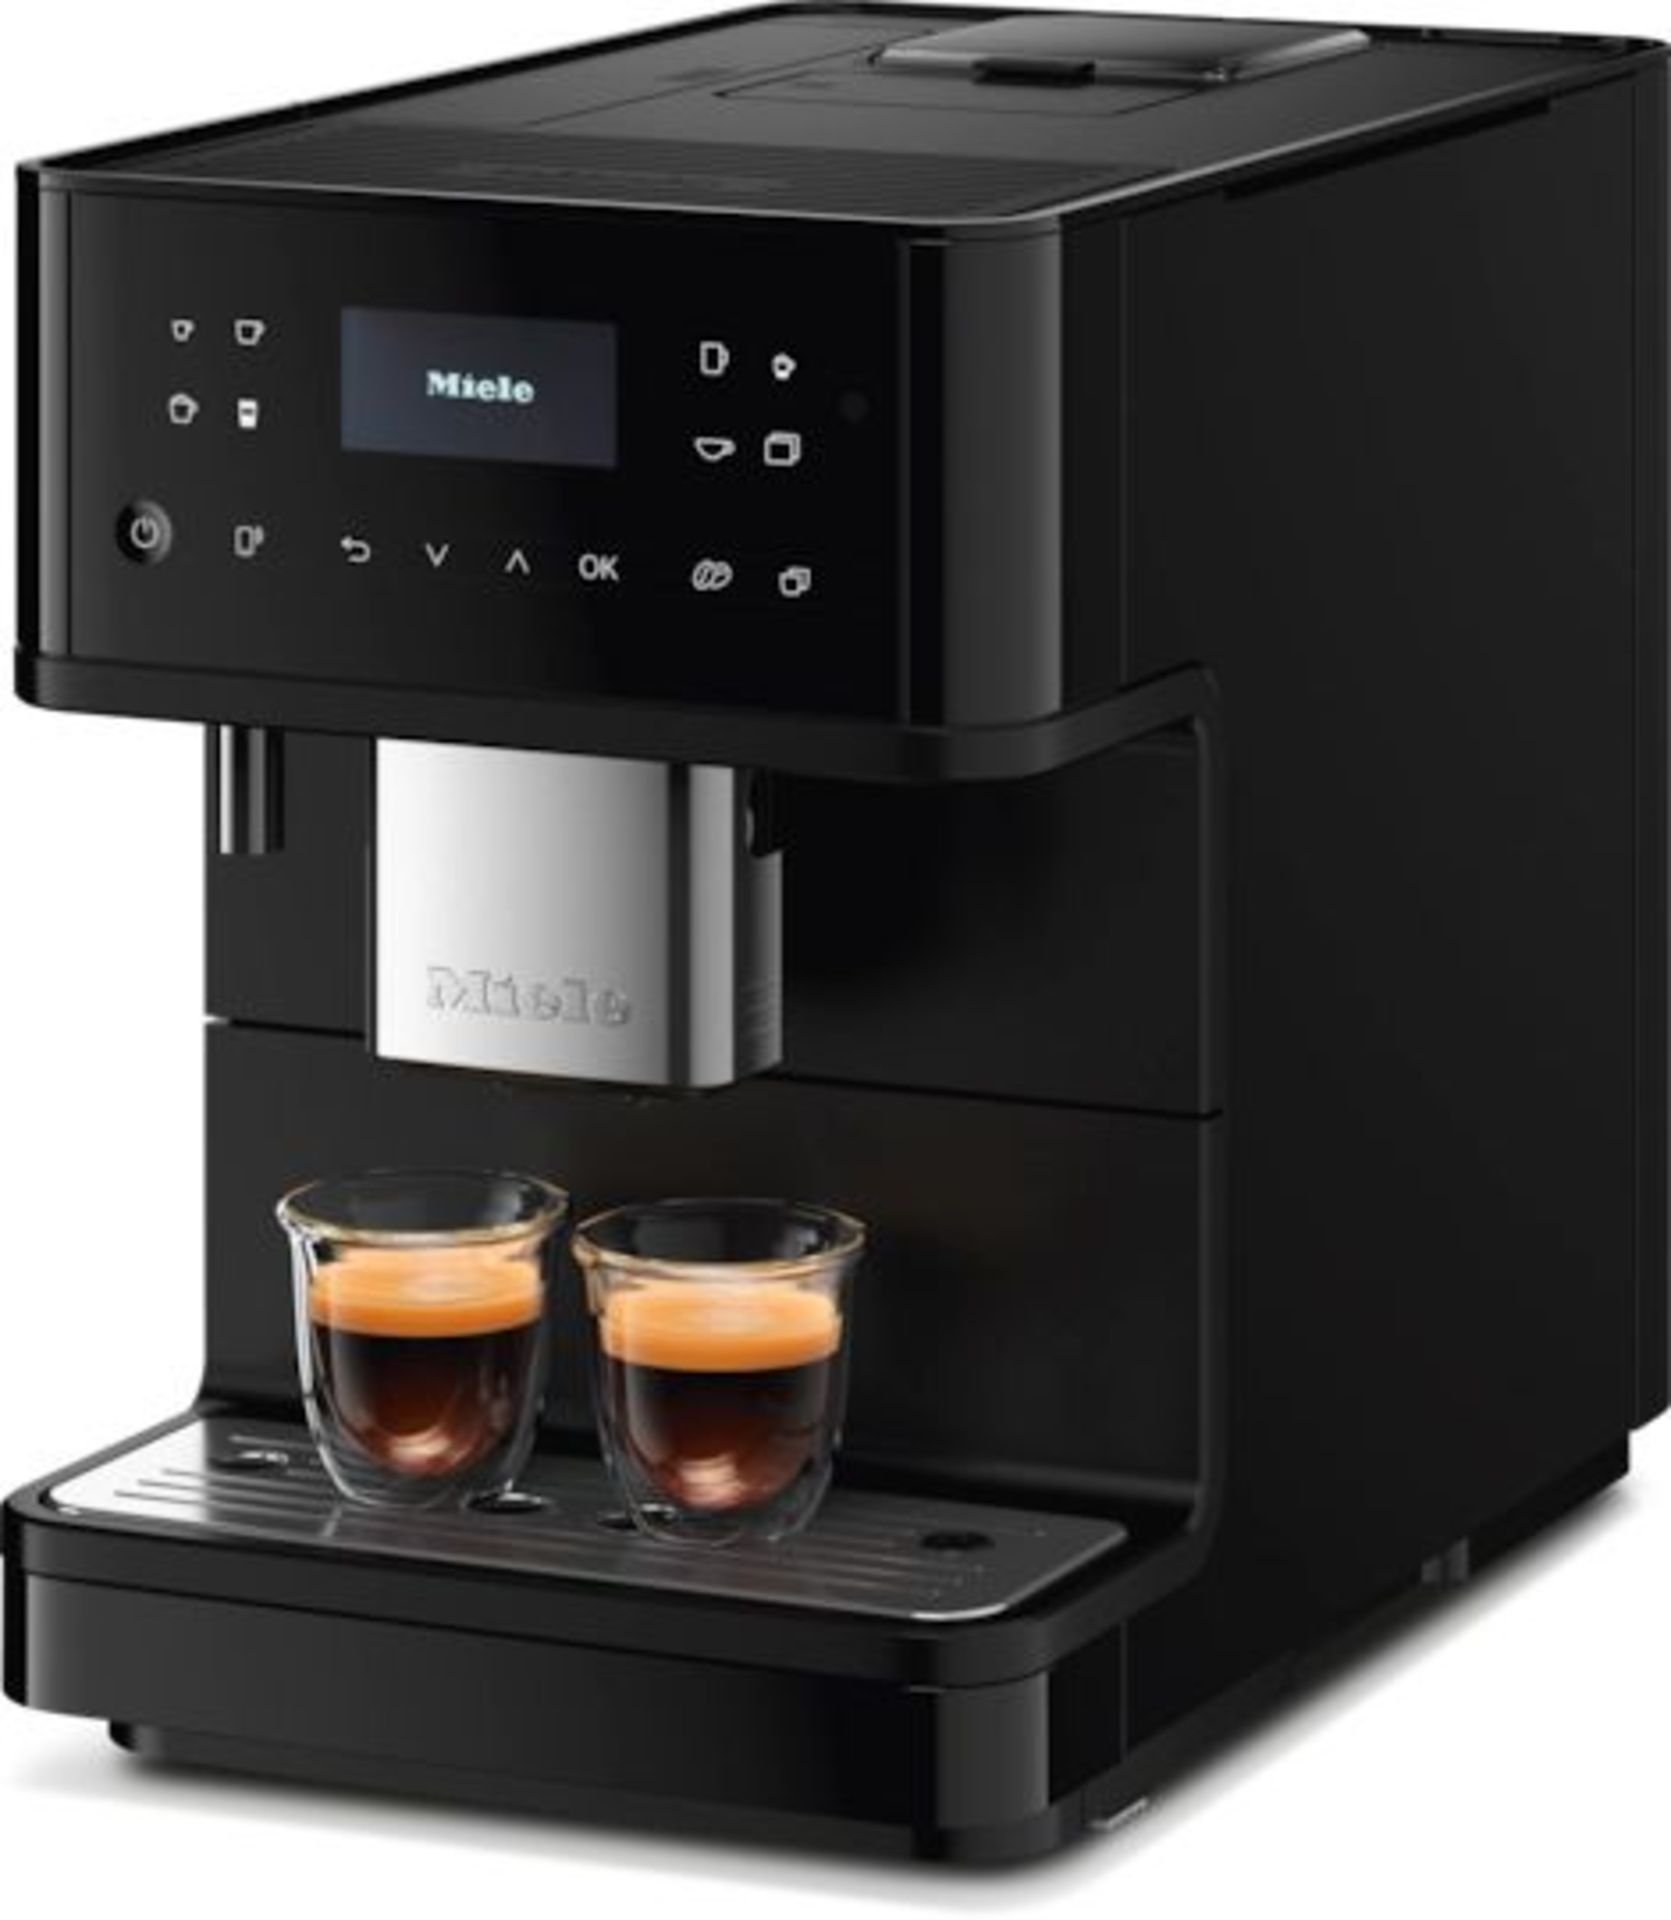 Miele CM6560 Countertop Coffee Machine. - EBR1. RRP £1,899.00. 1Touch for 2 – Fully automatic - Image 2 of 2